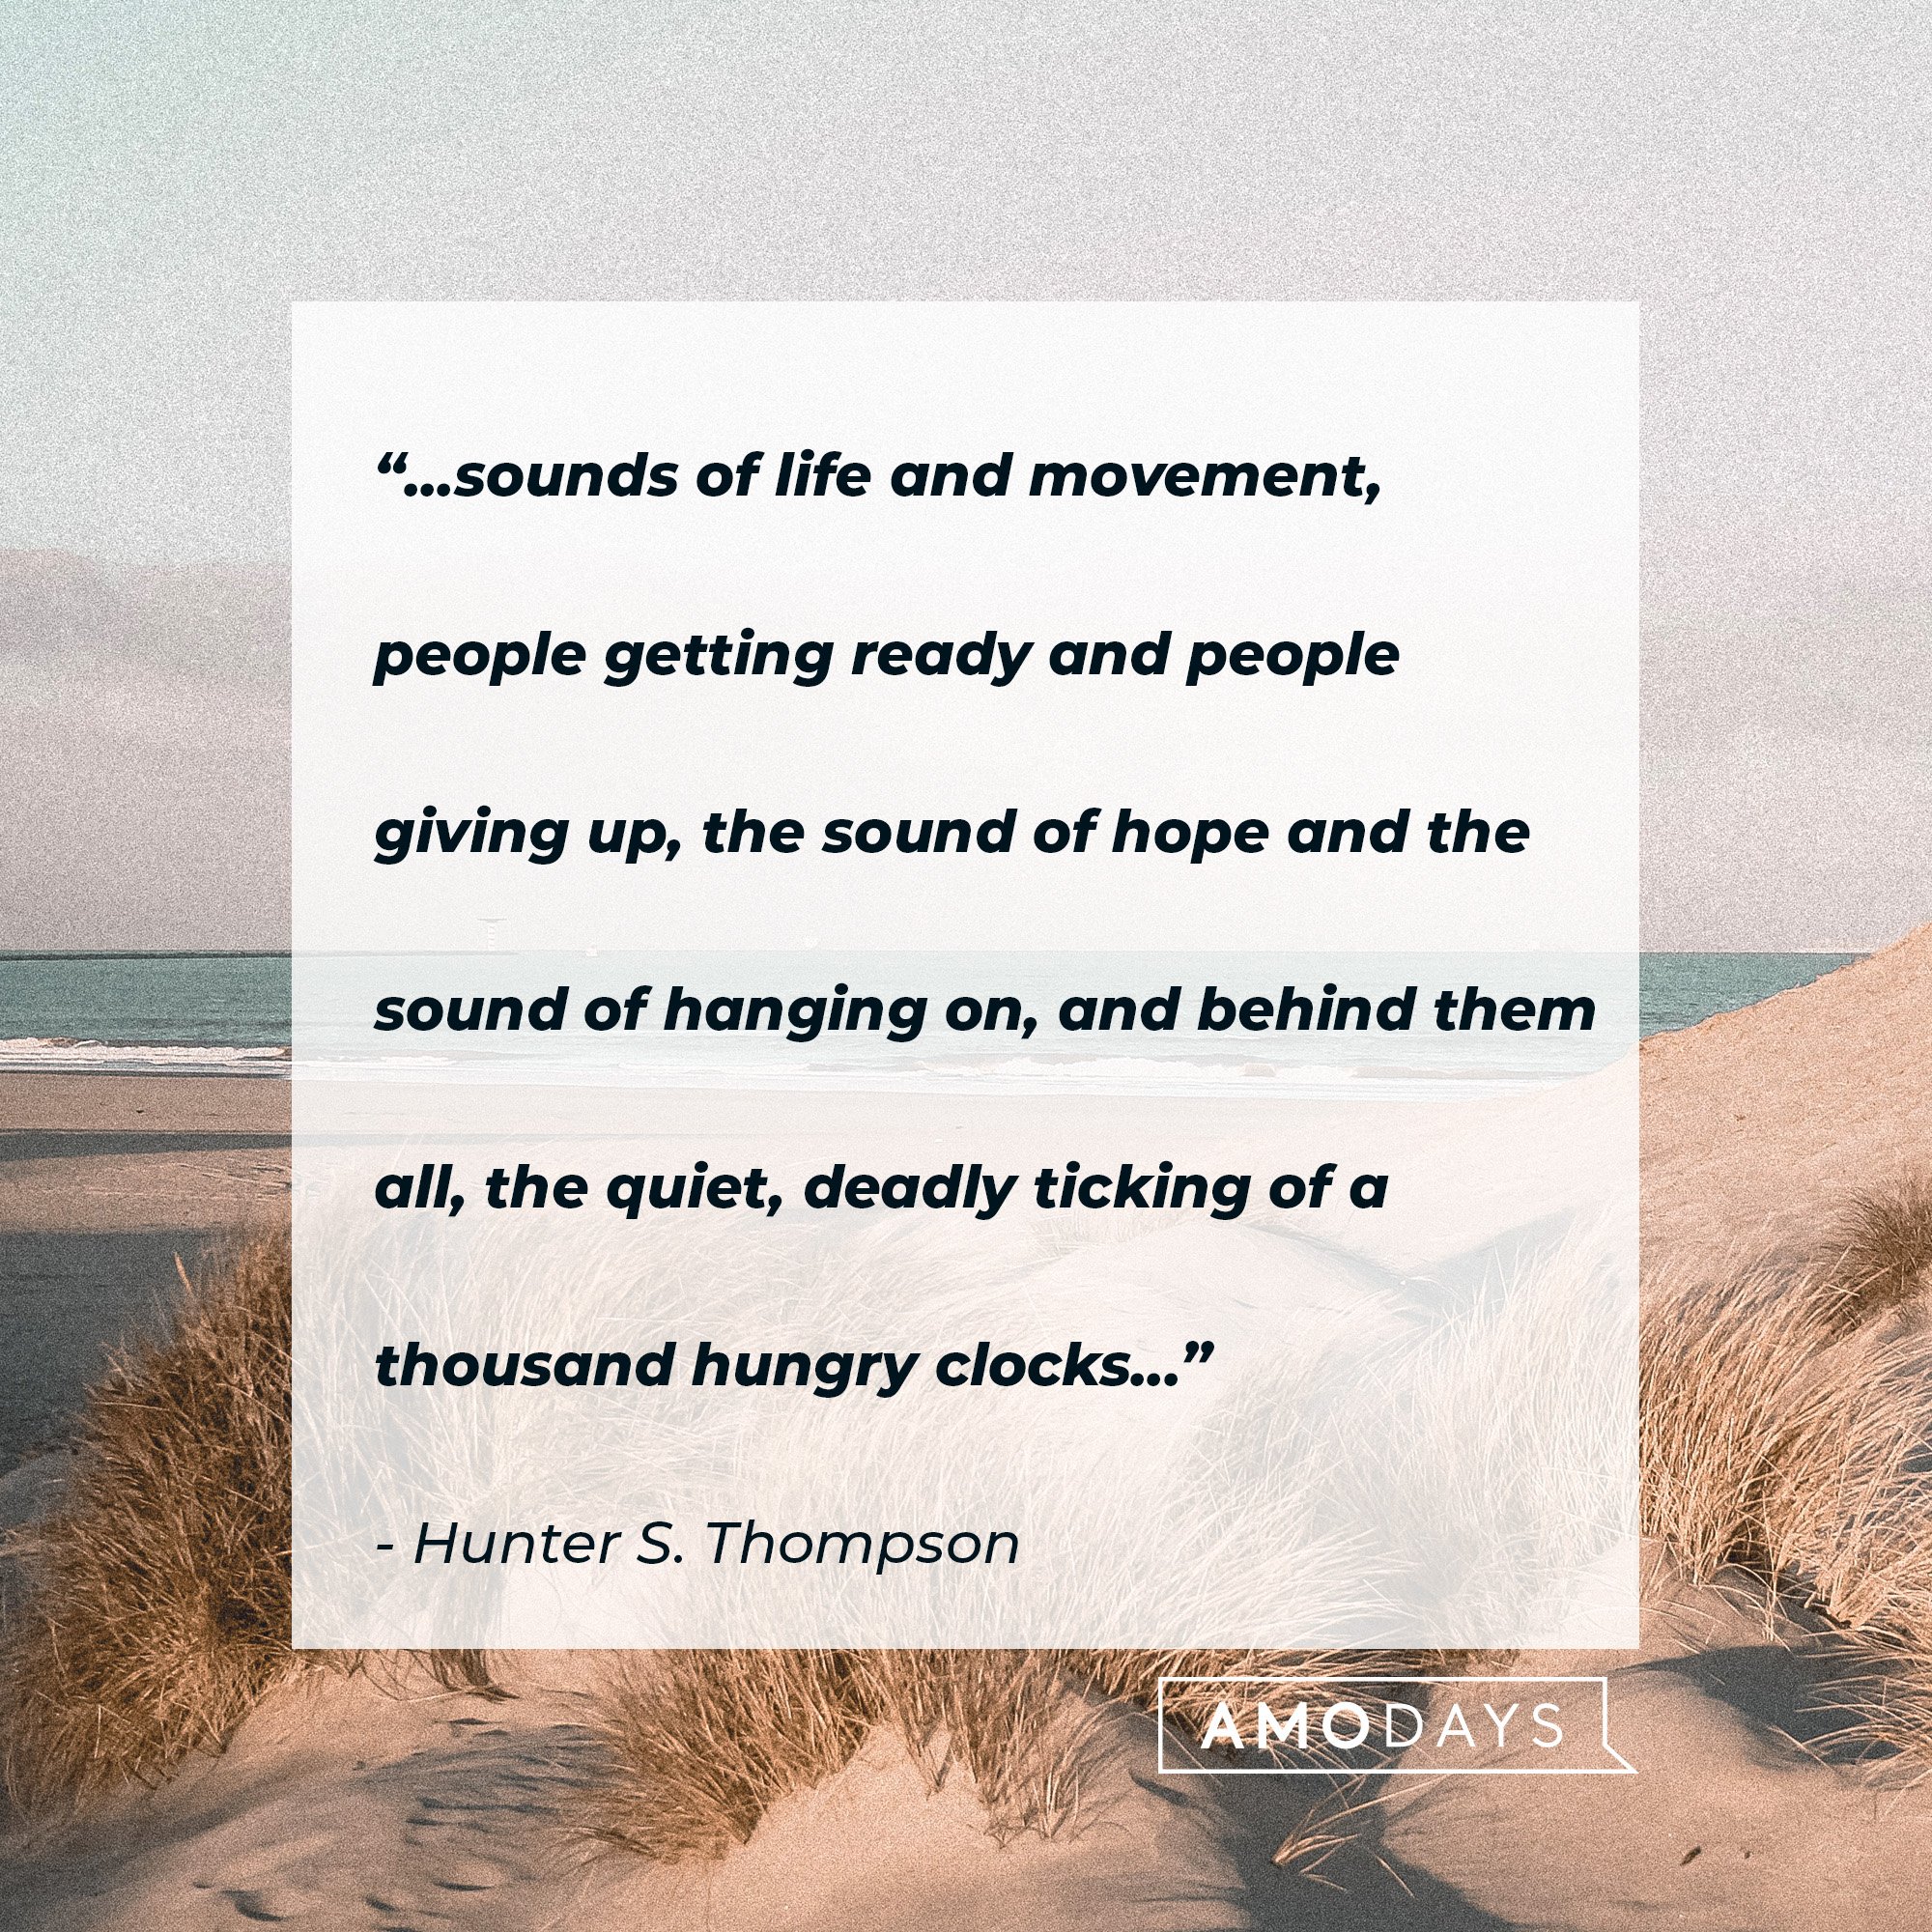 Hunter S. Thompson’s quote: “...sounds of life and movement, people getting ready and people giving up, the sound of hope and the sound of hanging on, and behind them all, the quiet, deadly ticking of a thousand hungry clocks...” | Image: AmoDays